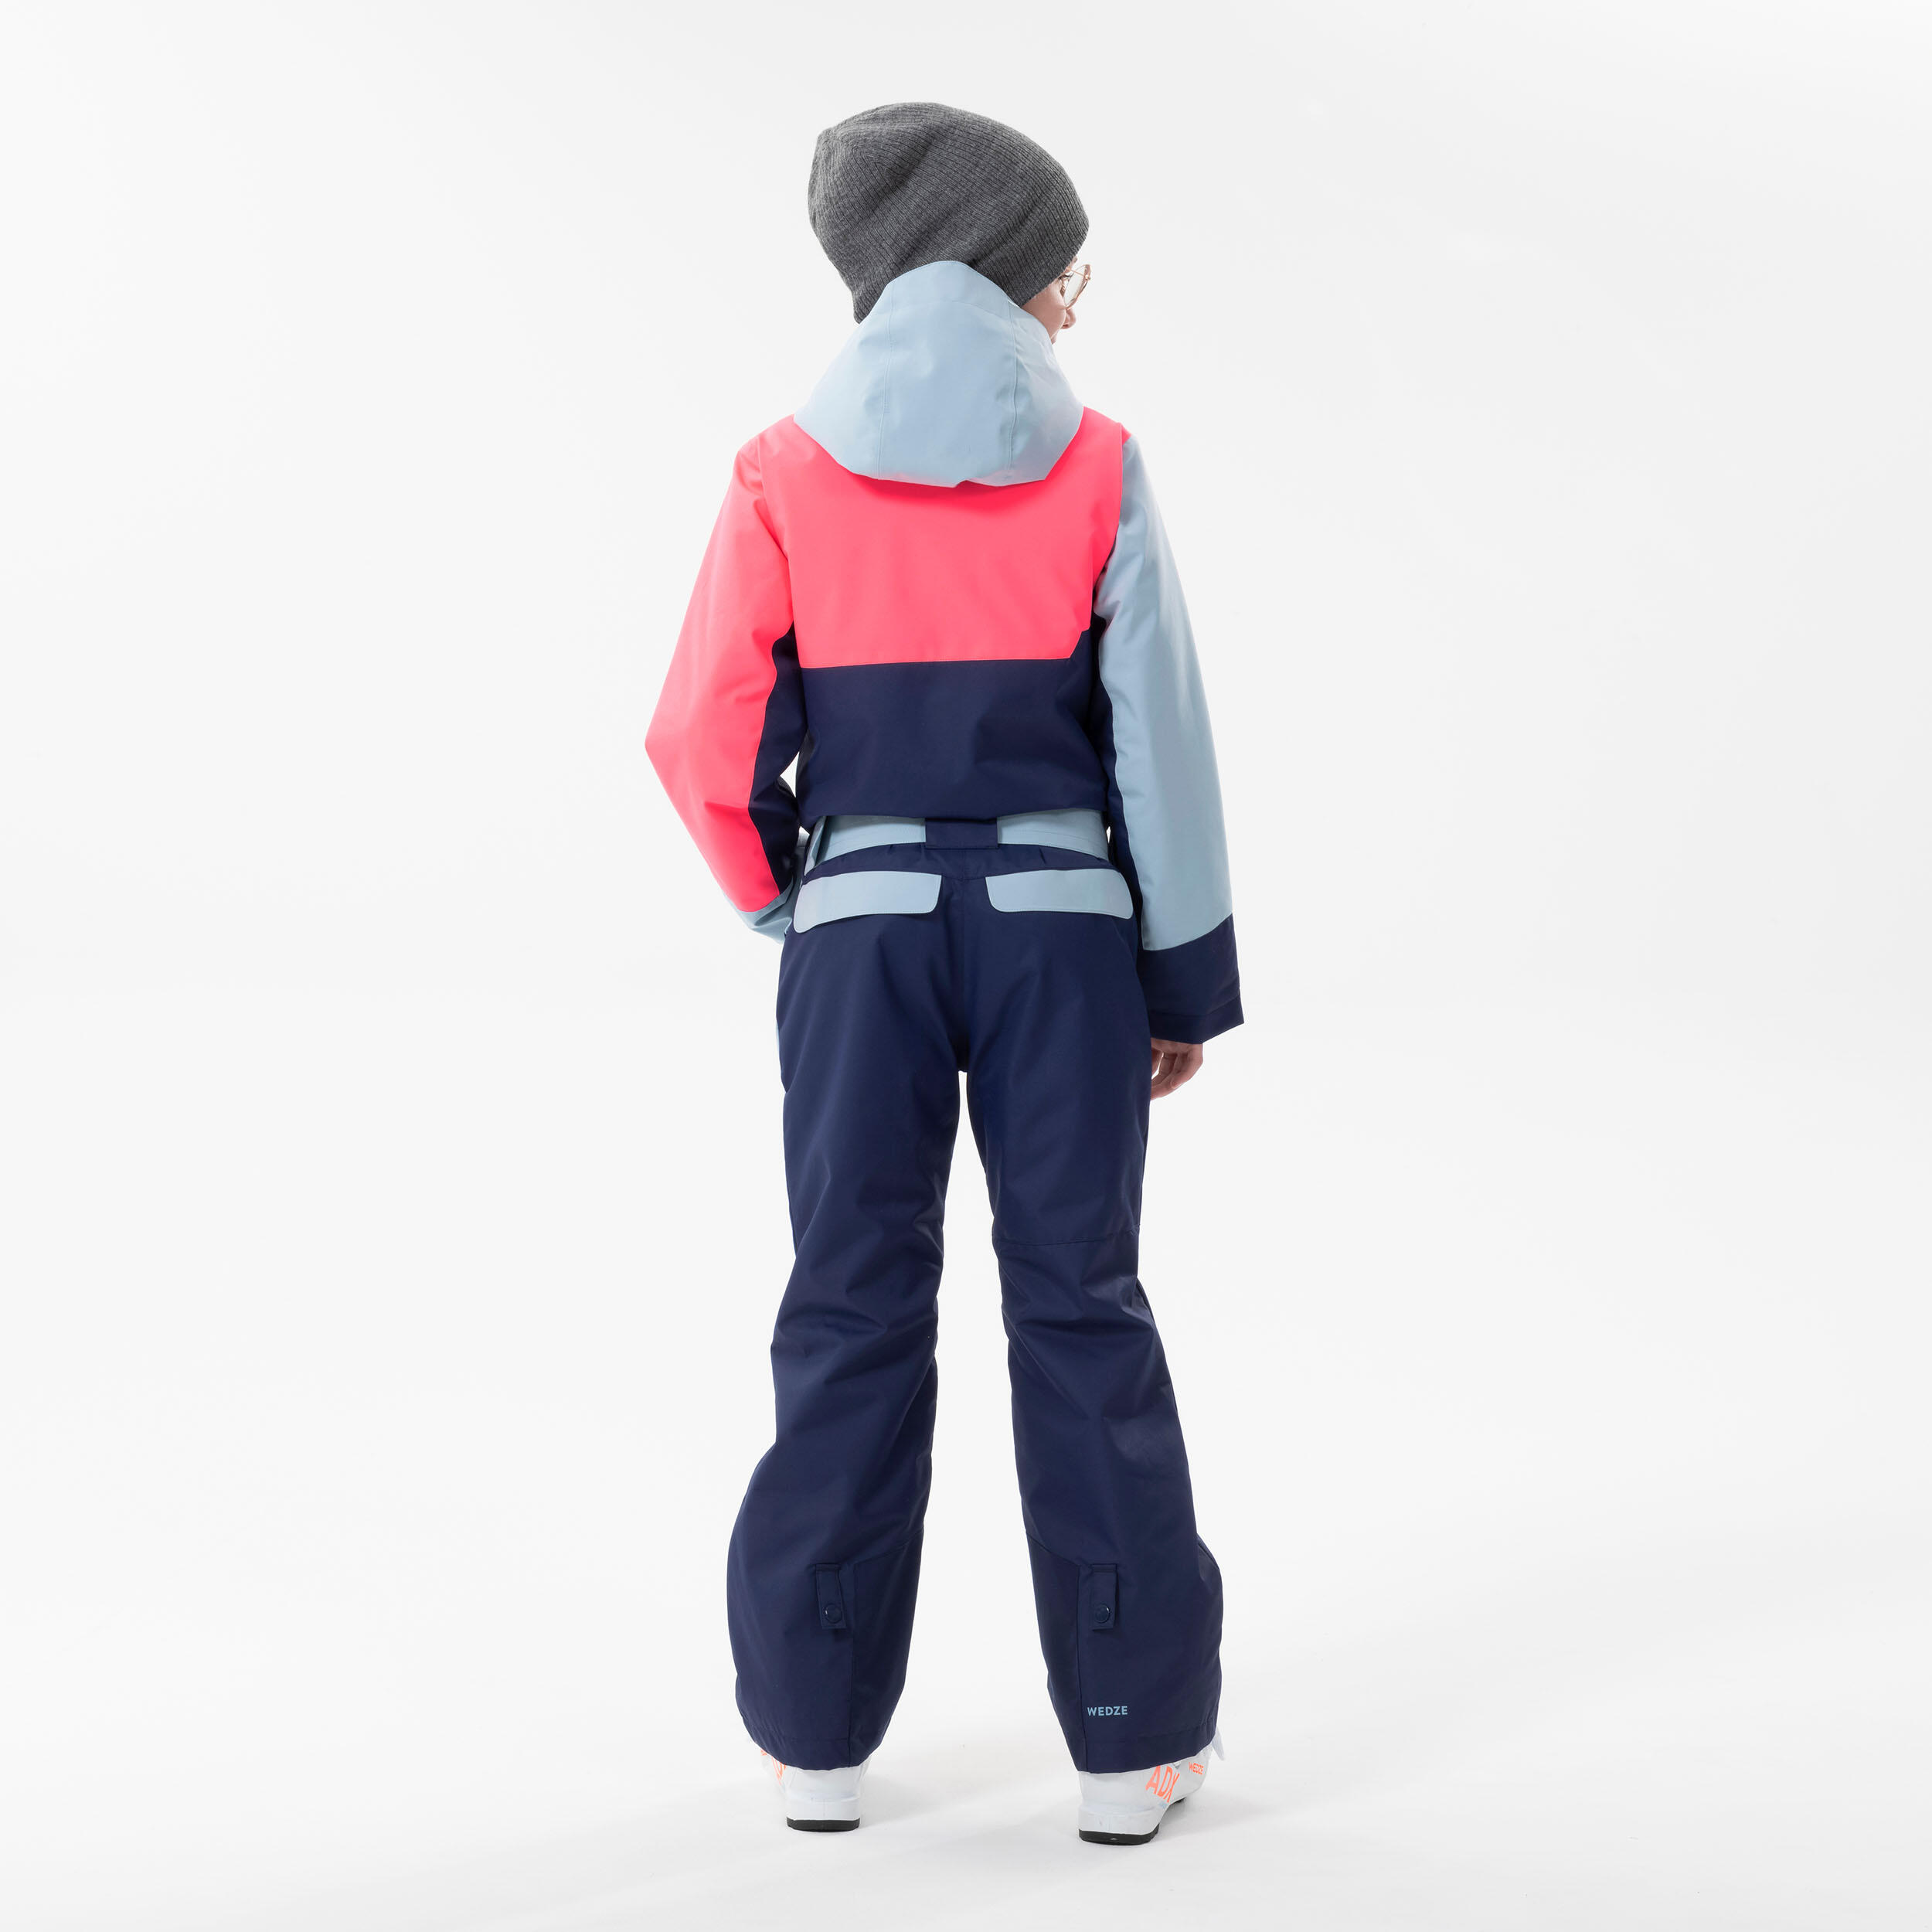 KIDS’ WARM AND WATERPROOF SKI SUIT 500 PINK AND BLUE 9/11